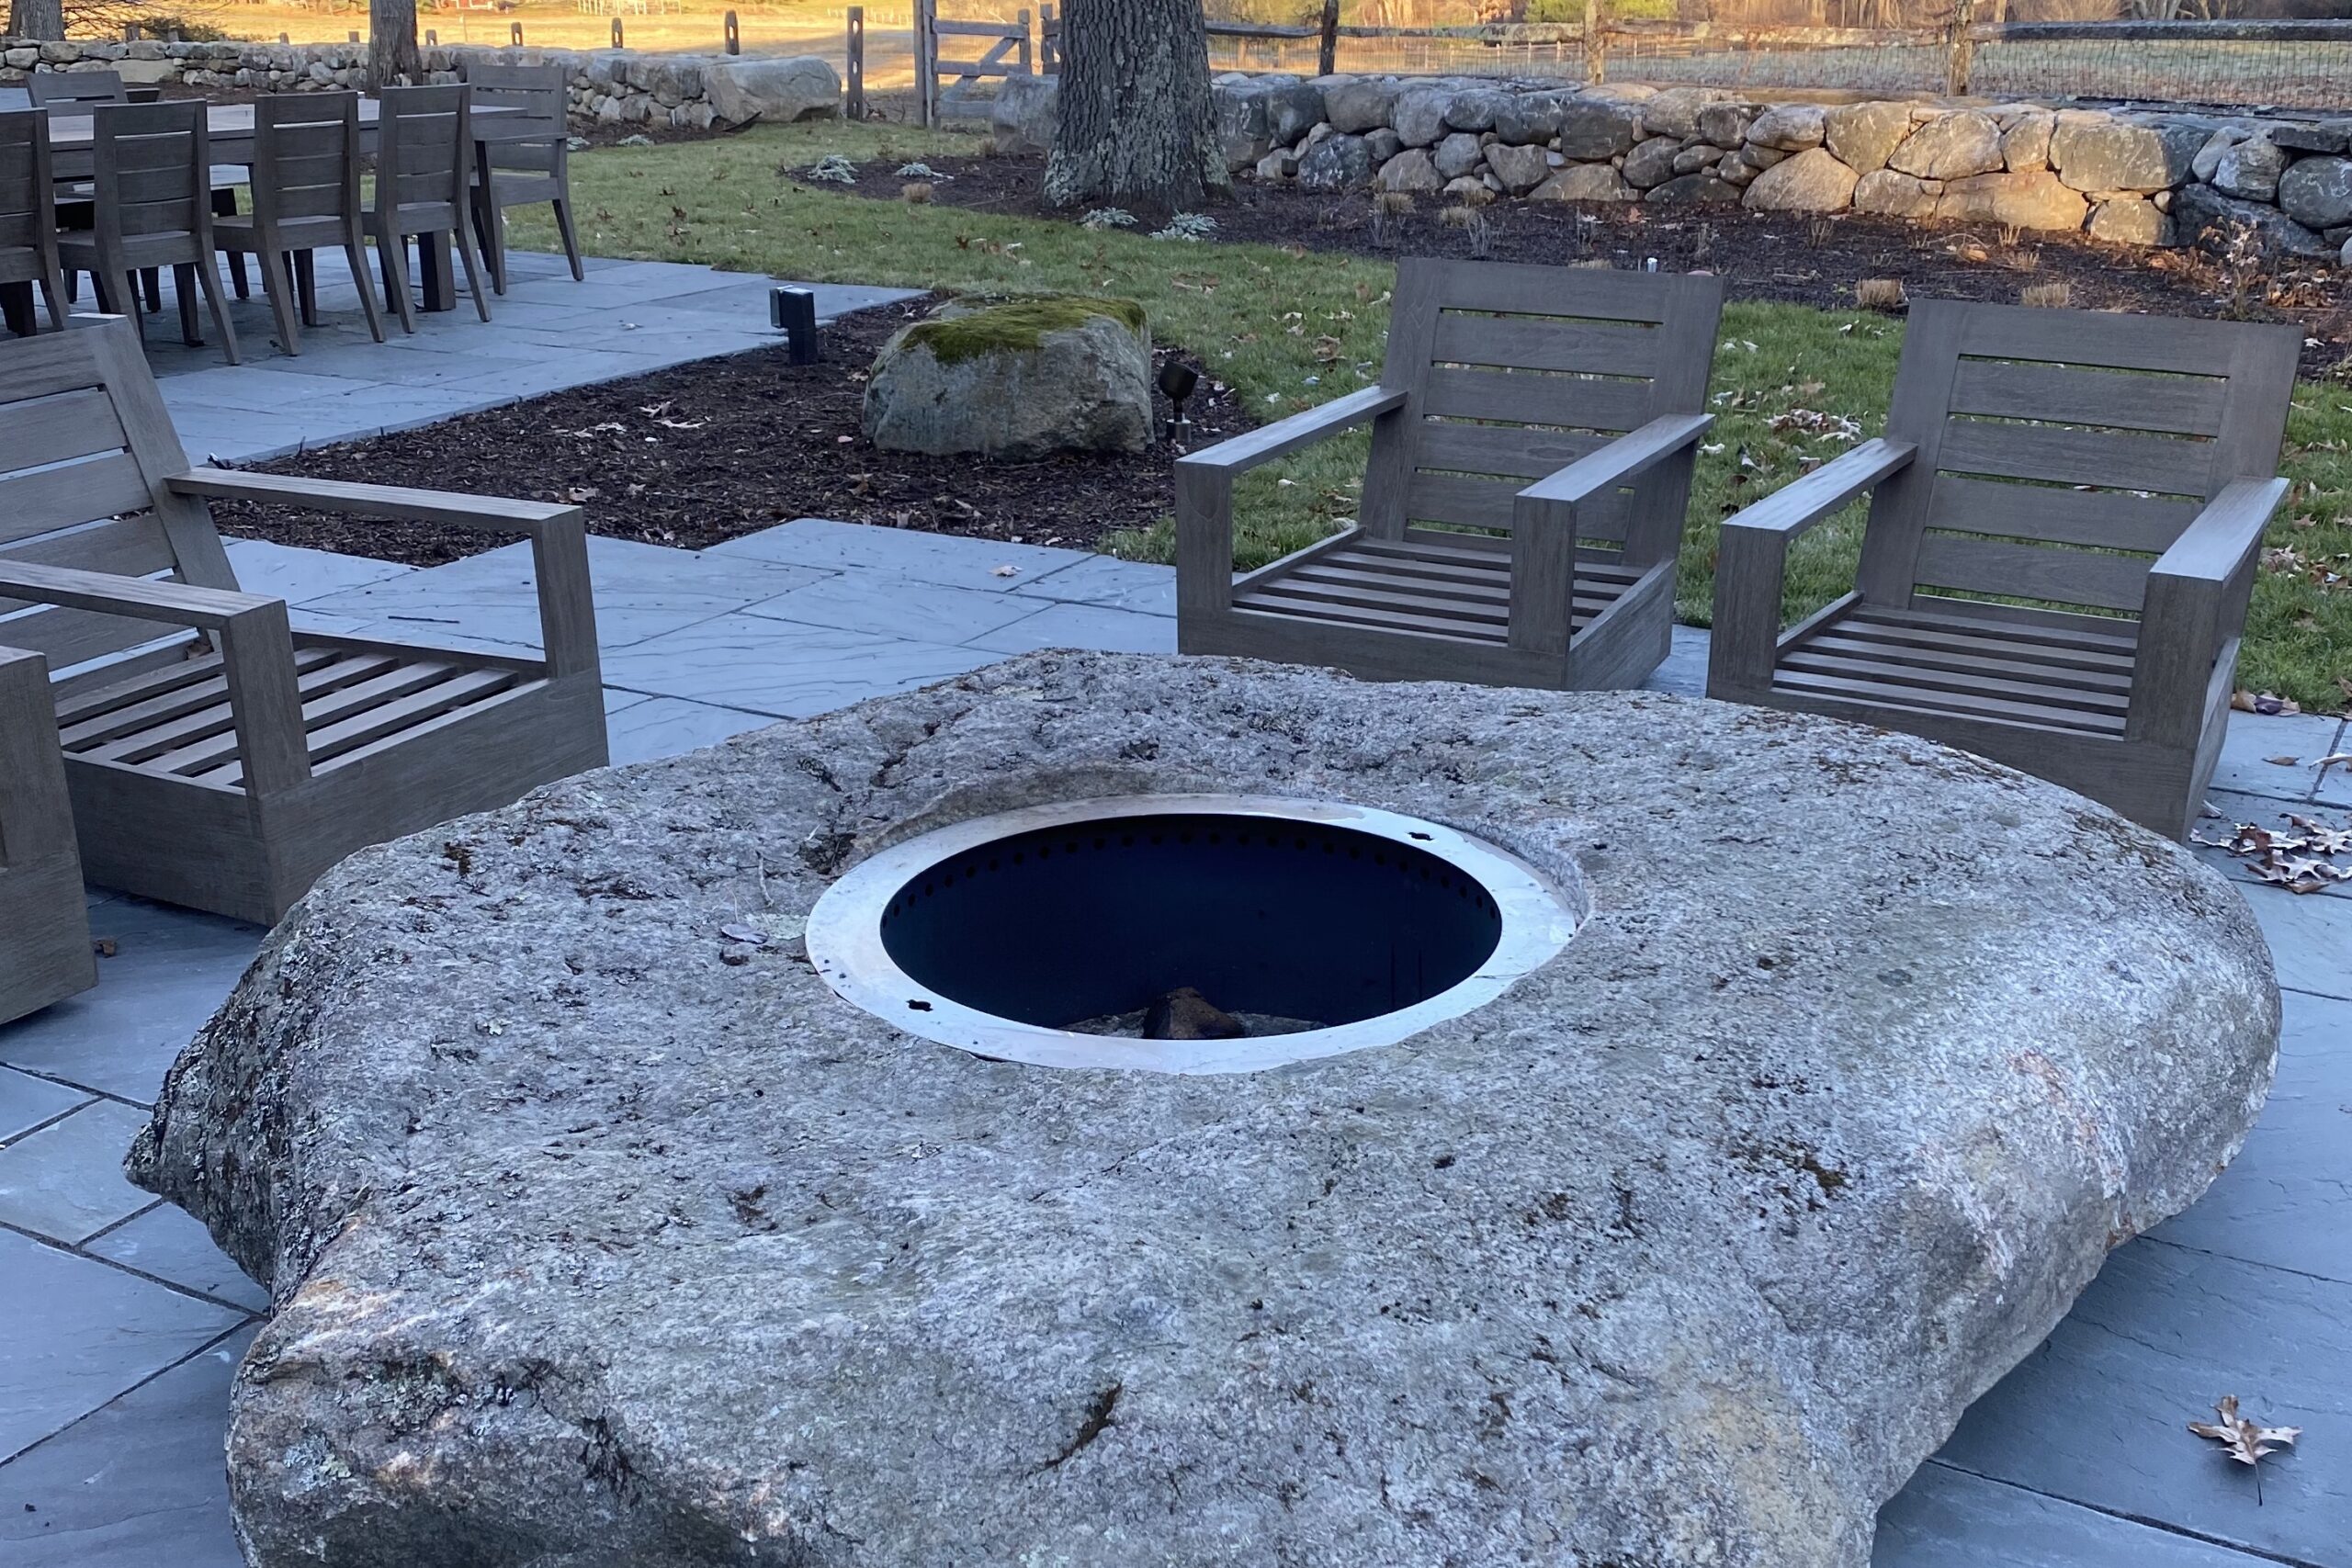 high-end stone design general contracting: Impressively large monolithic stone outdoor fire pit surrounded by inviting chairs.